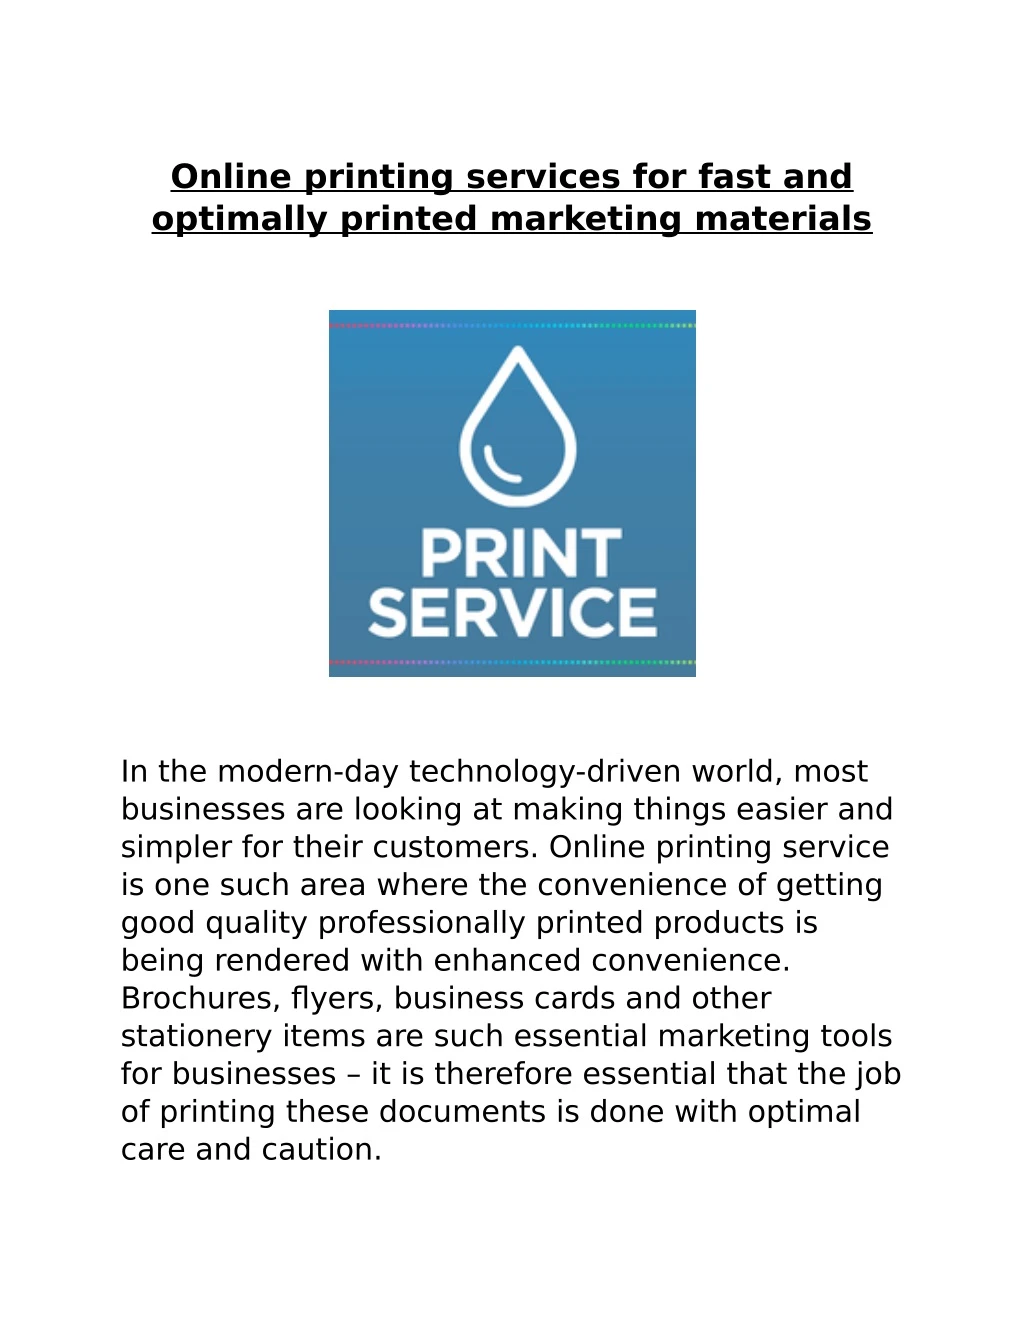 online printing services for fast and optimally